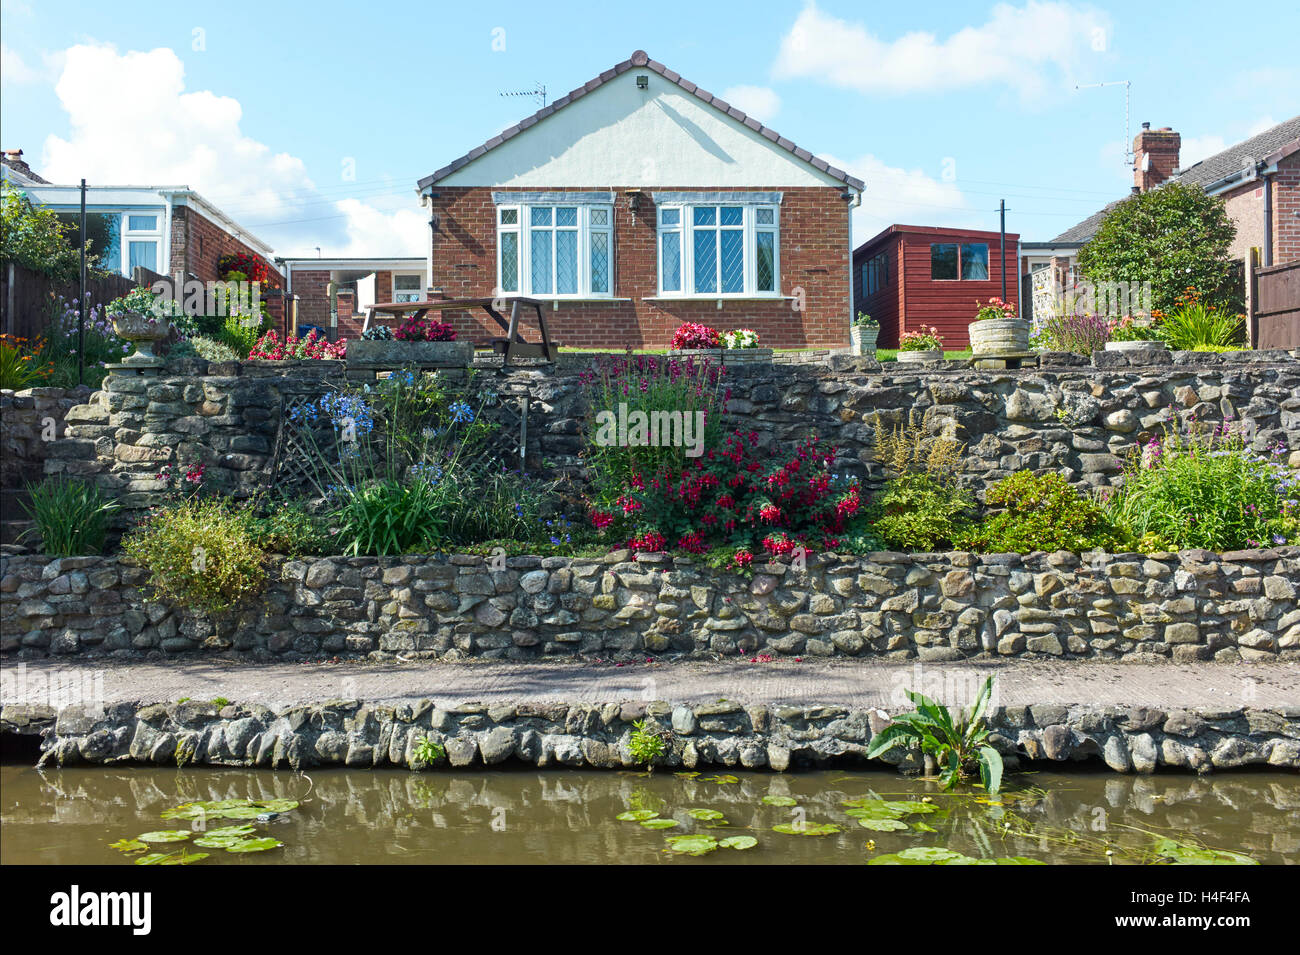 Back garden of bungalow on Trent & Mersey canal Stock Photo